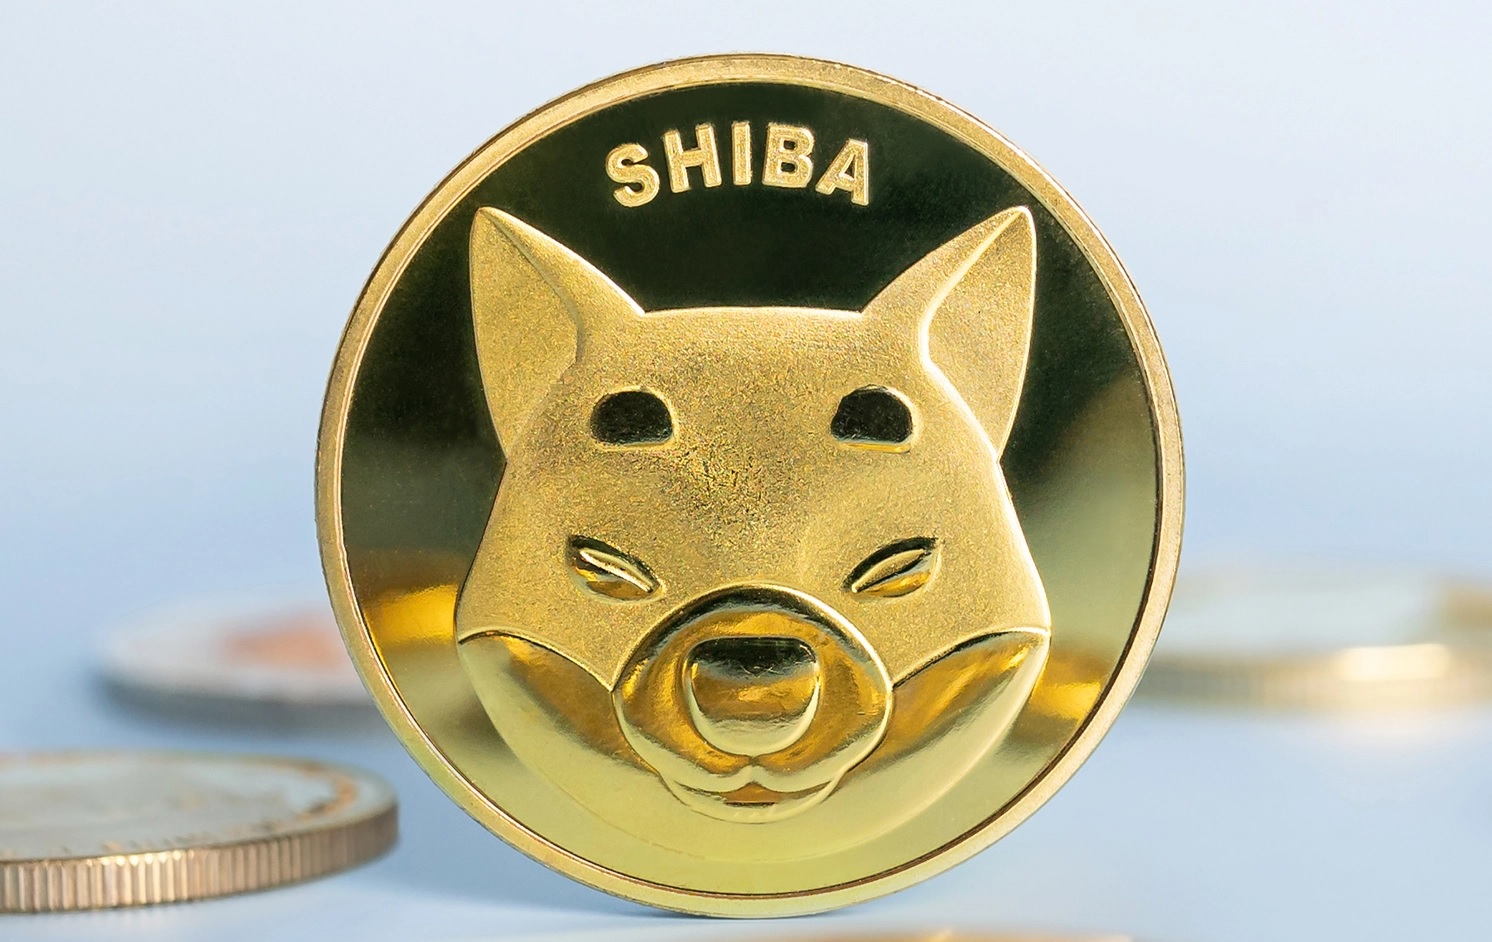 Shiba Inu leading Dogecoin in gains, SHIB up over 23% on the day